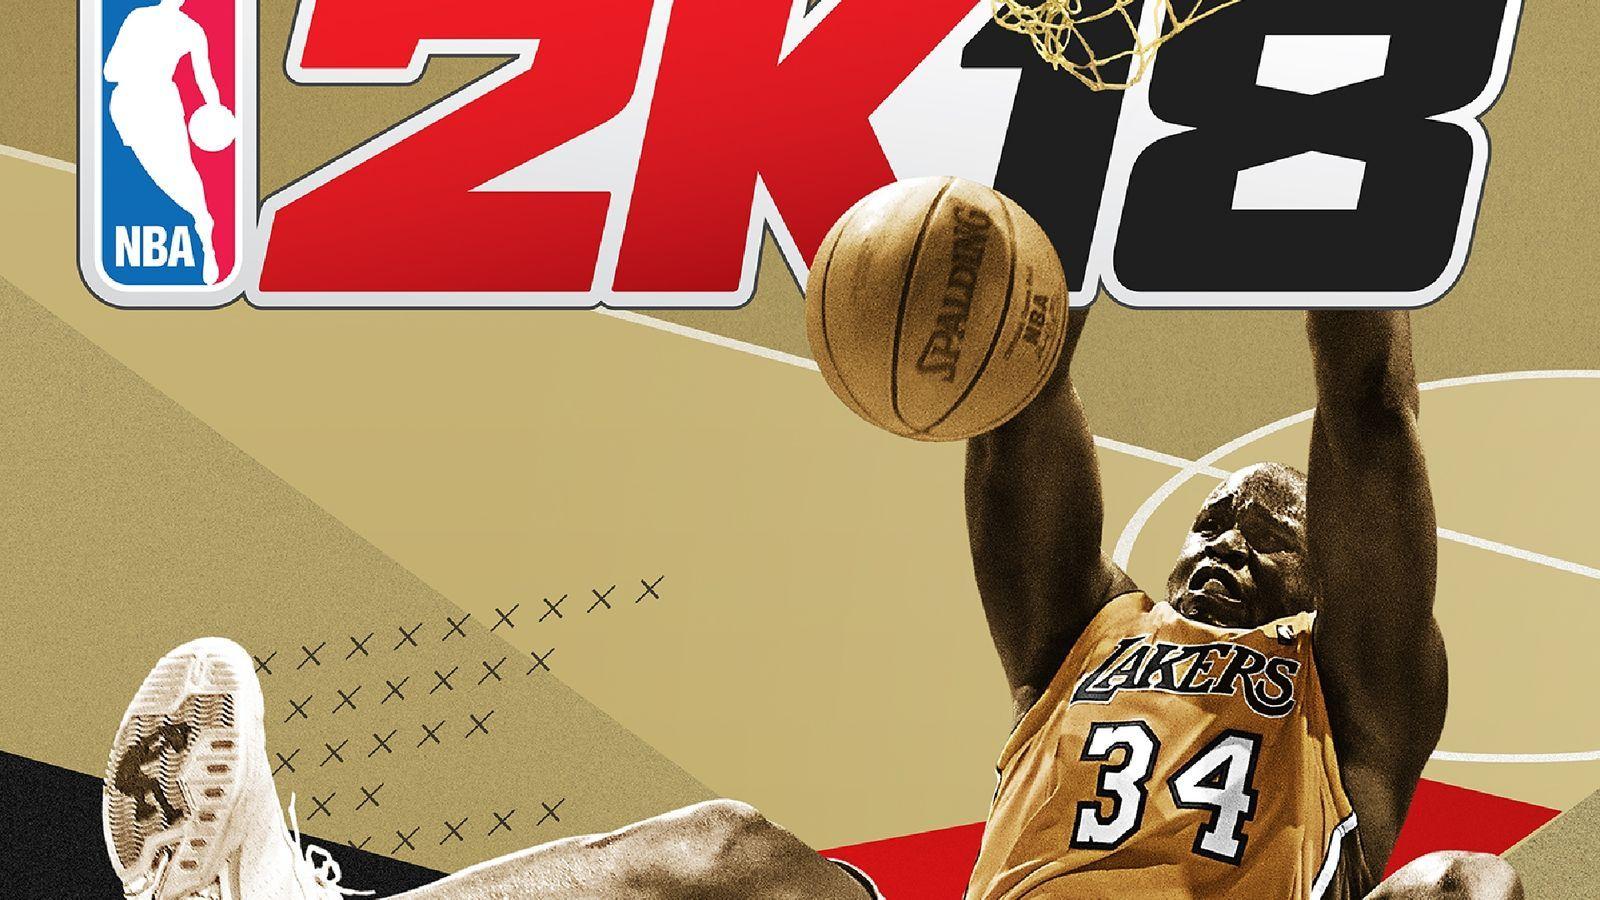 NBA 2K18 announces launch date, celebrates Shaq on special cover